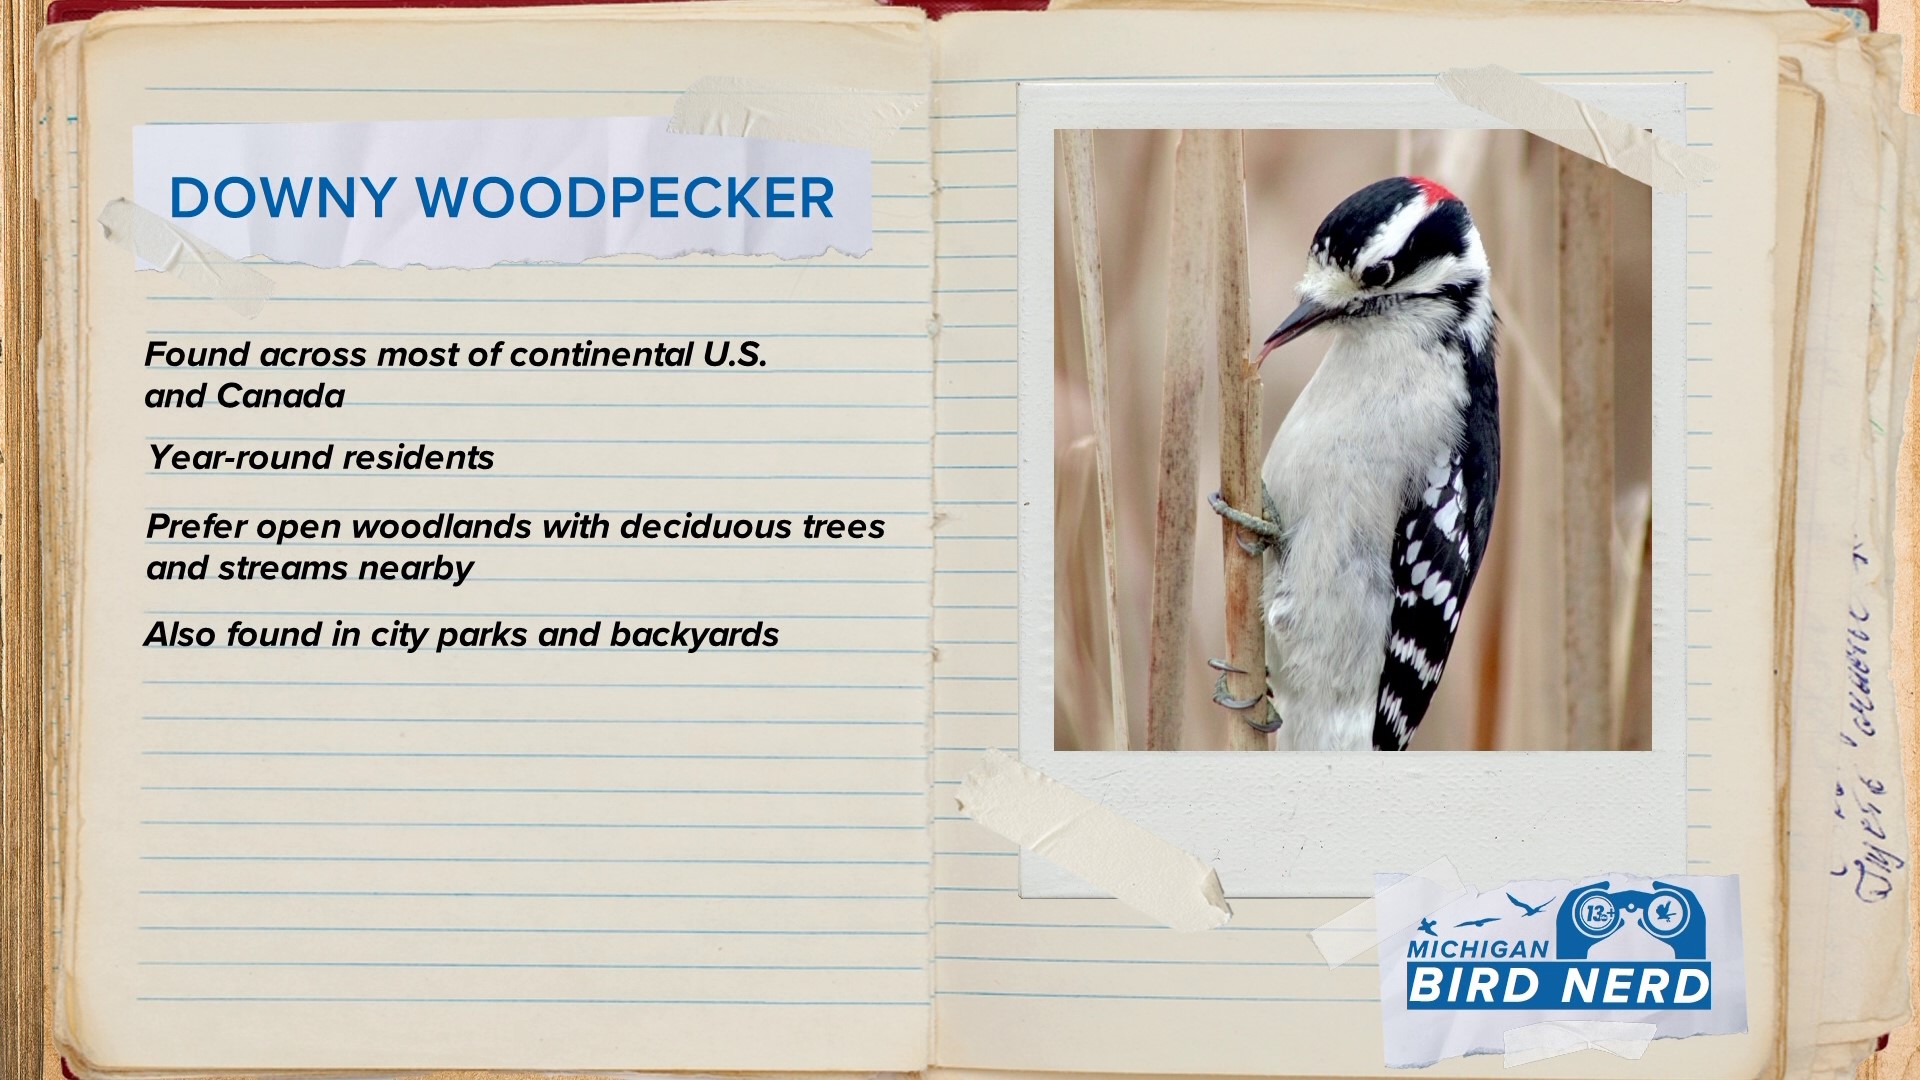 Matt Gard travels to the wetlands of Huff Park in Grand Rapids to learn how to find the downy woodpecker.